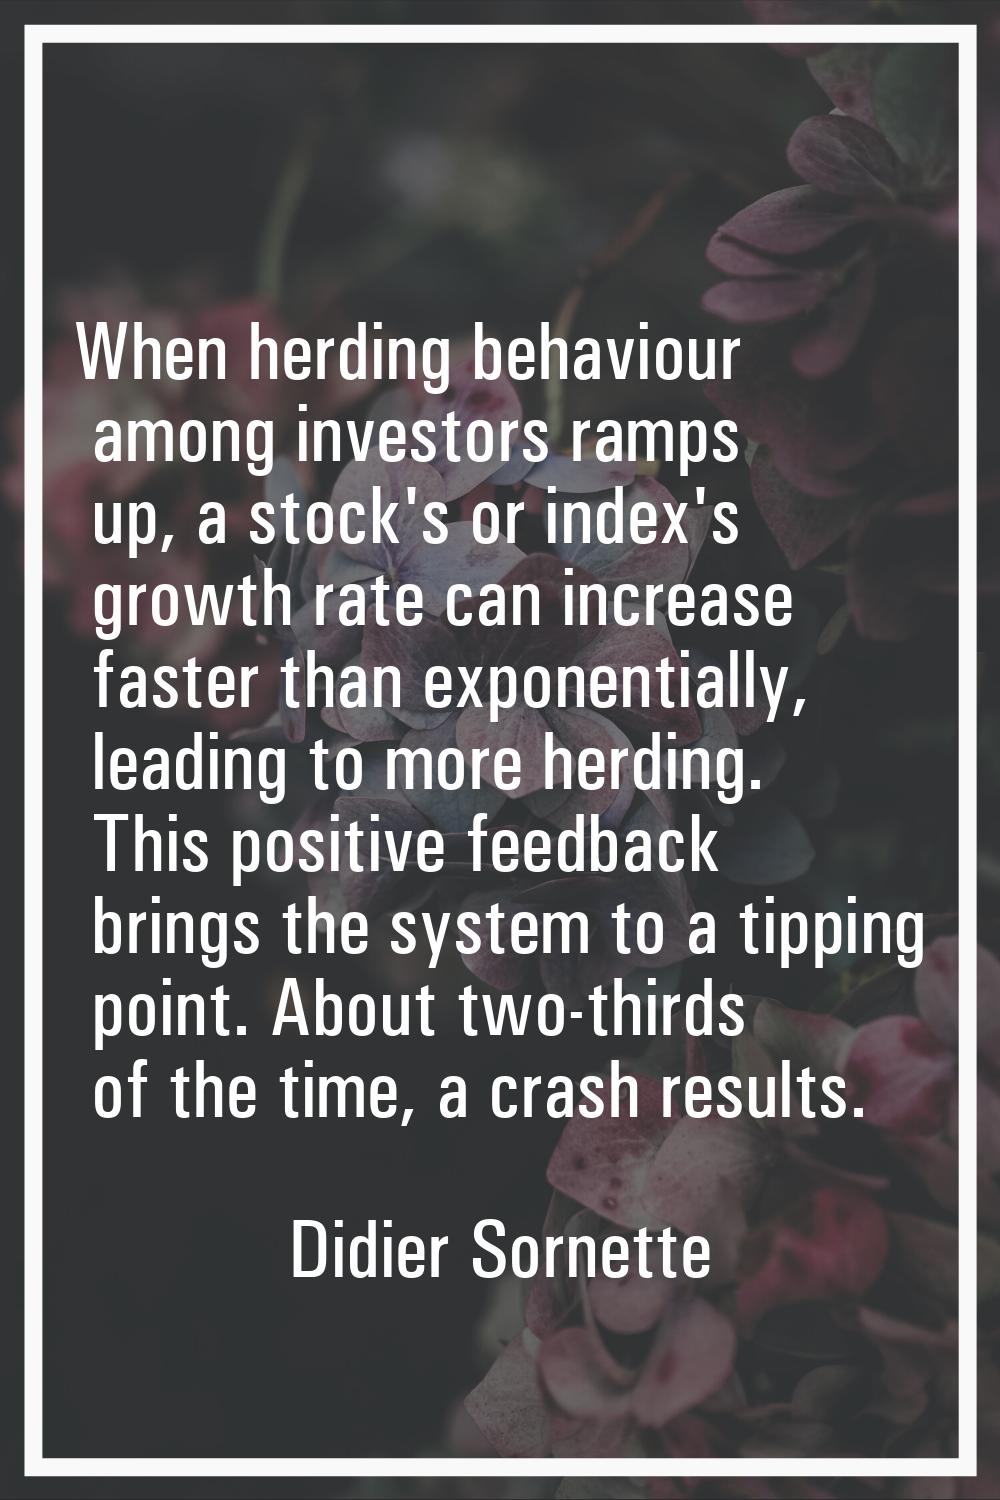 When herding behaviour among investors ramps up, a stock's or index's growth rate can increase fast